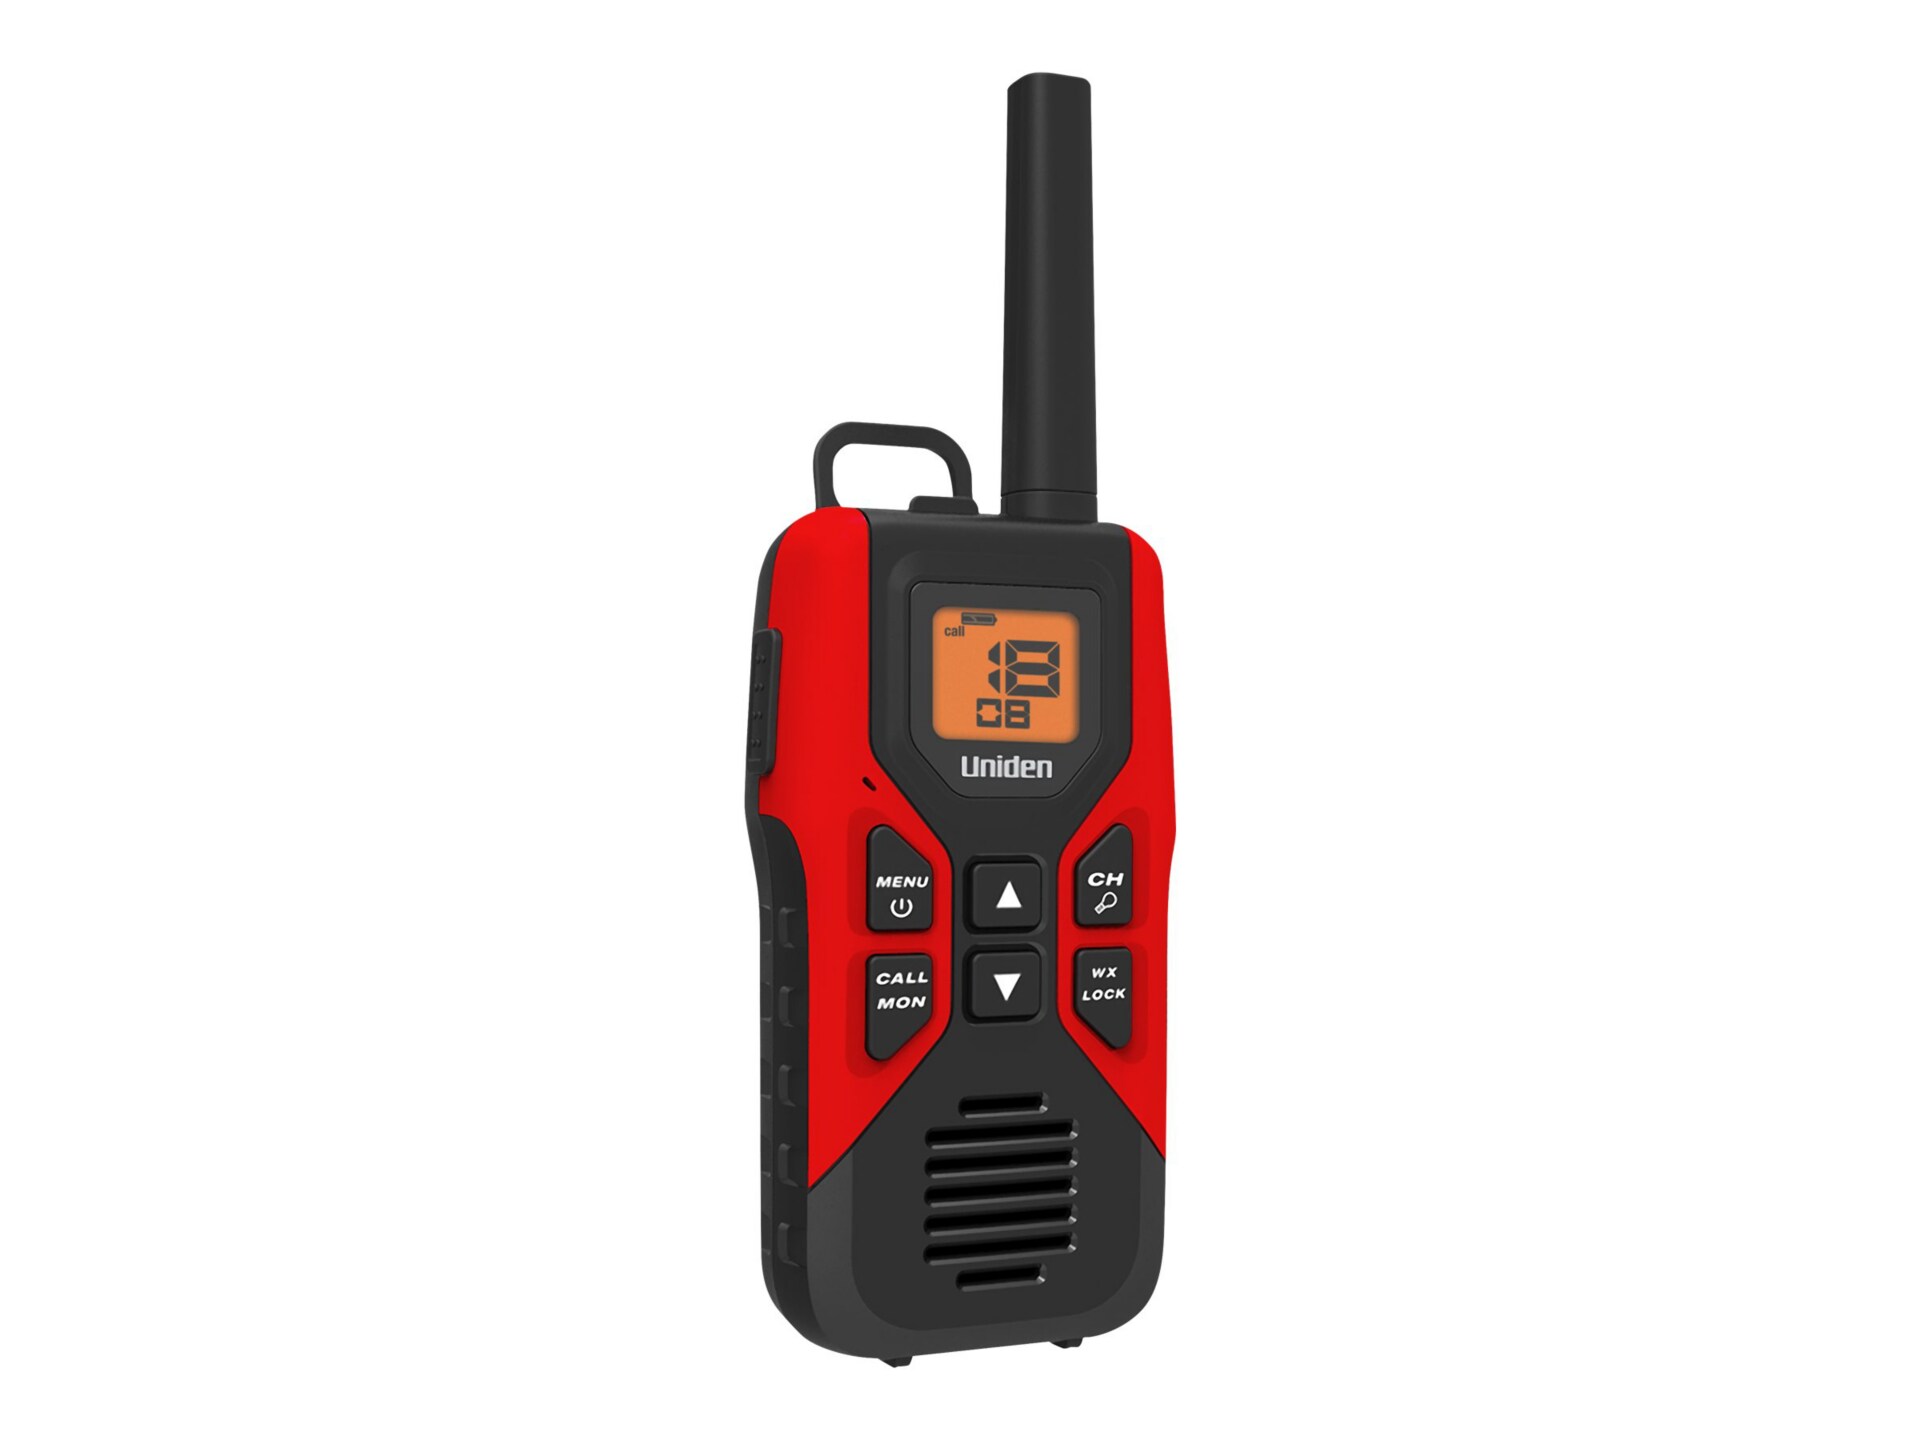 Uniden GMR3055-2CKHS two-way radio - FRS/GMRS